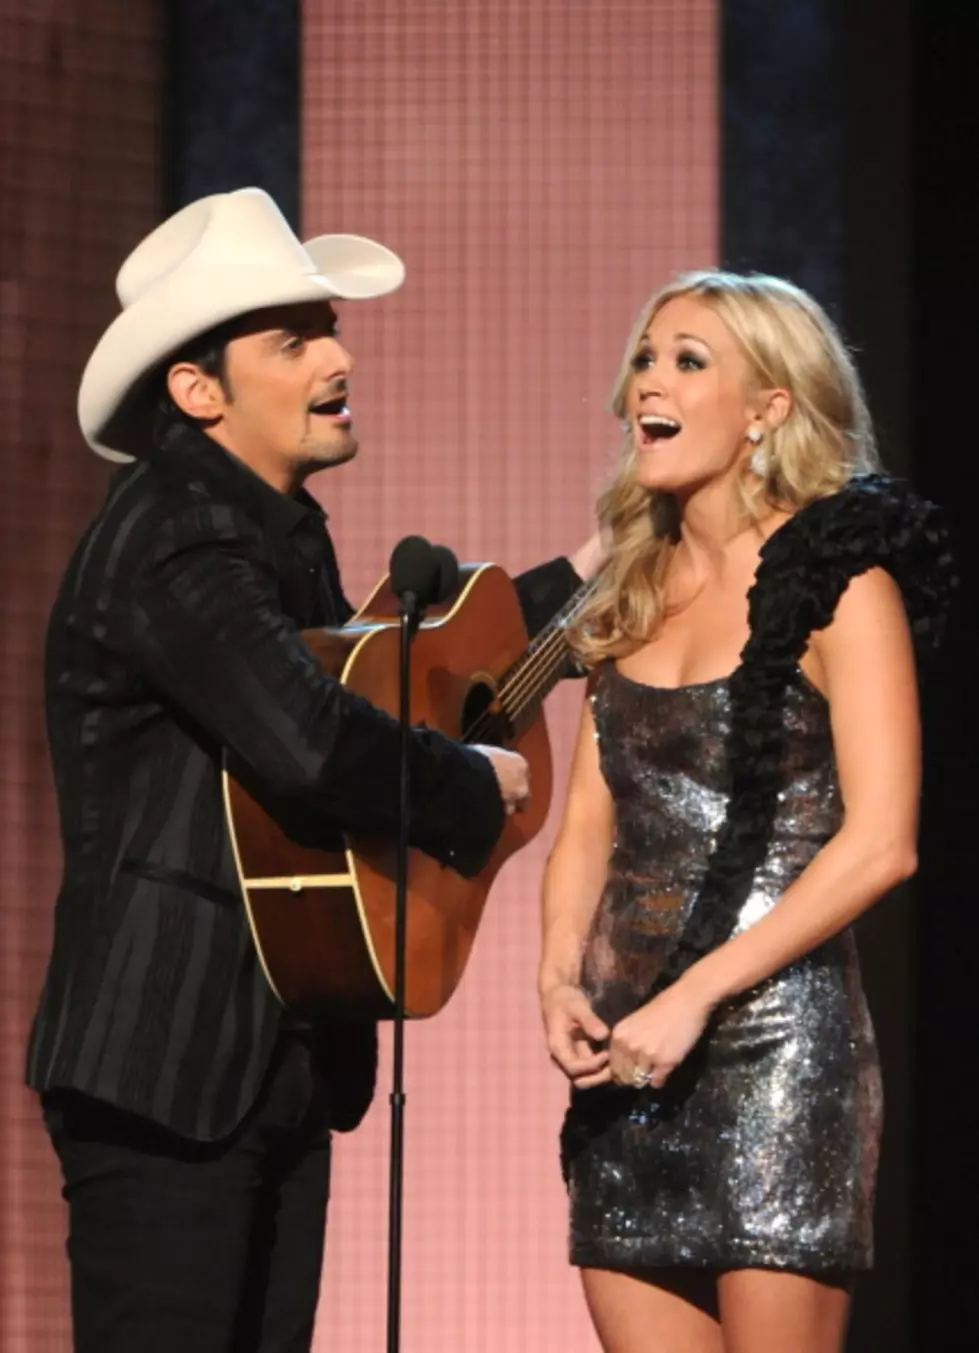 Carrie Underwood Duets With Brad Paisley Who Sings On The Voice [VIDEO]